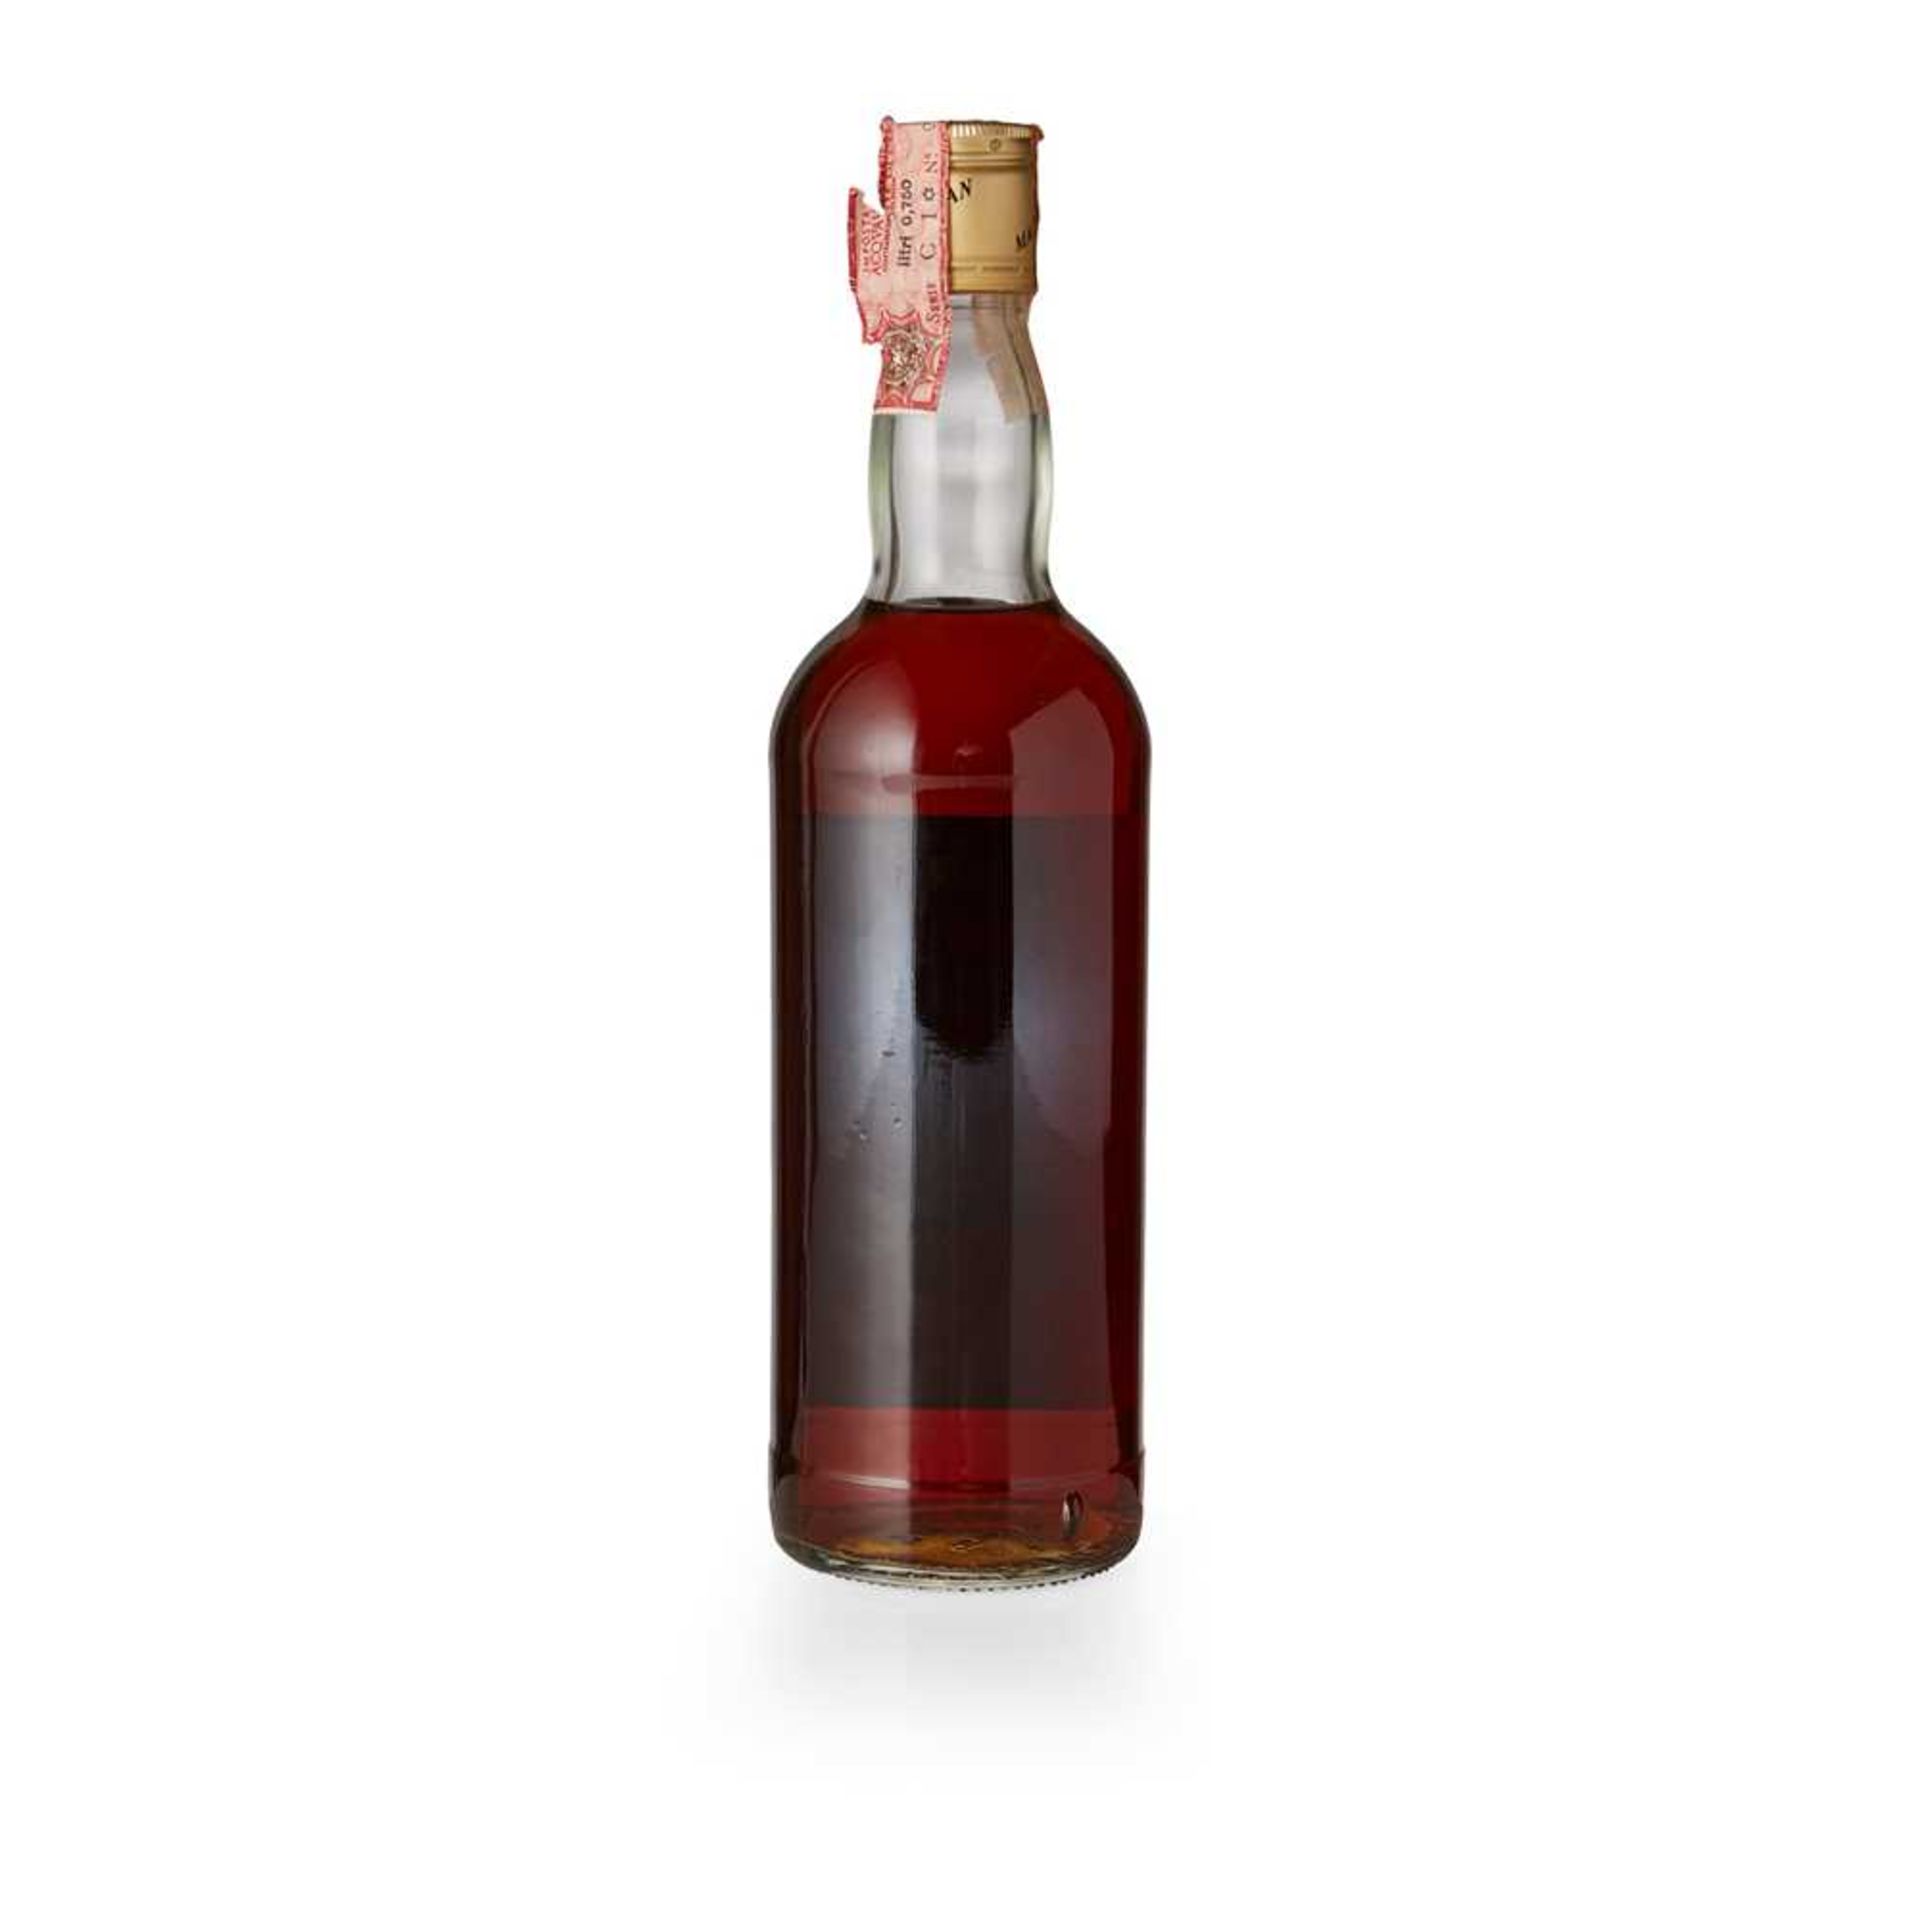 THE MACALLAN 1963 SPECIAL SELECTION - RINALDI IMPORT - Image 3 of 3